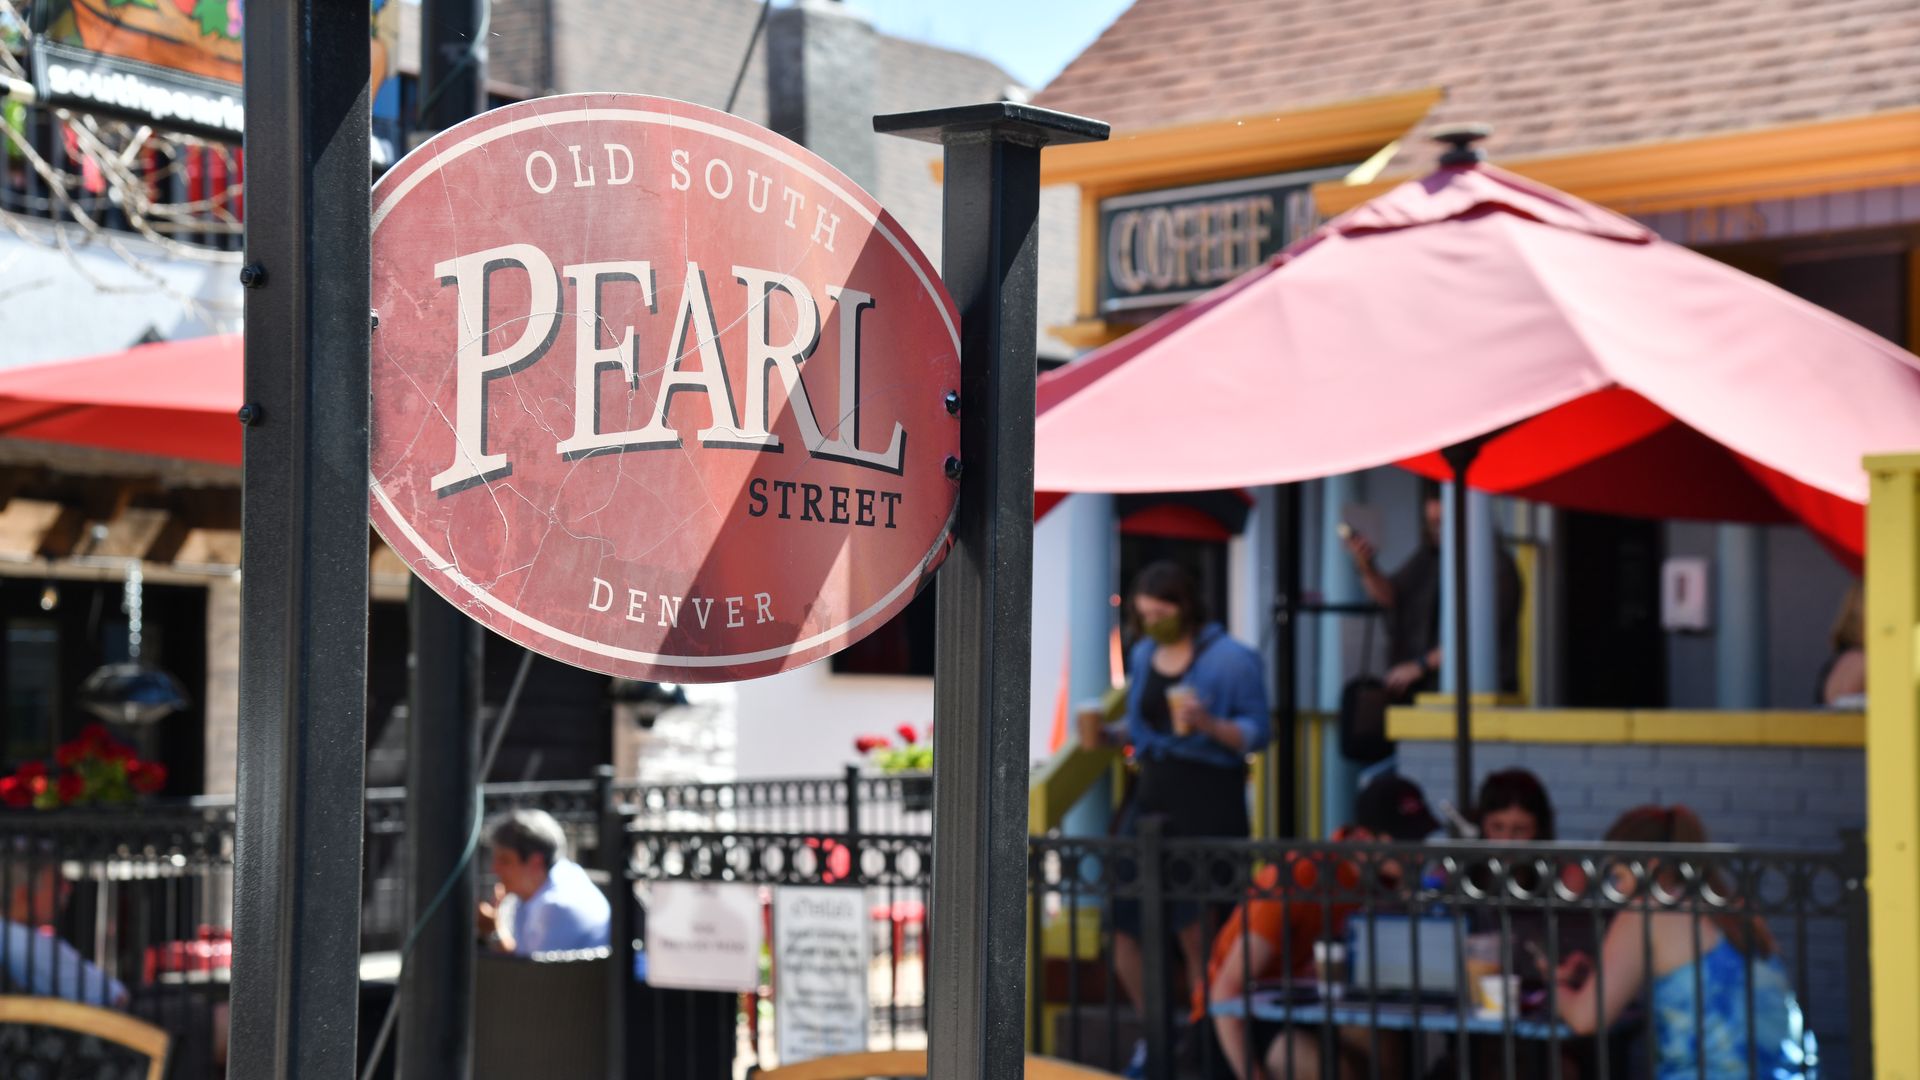 Old South Pearl Street sign in front of Stella's Coffee Haus Photo: Hyoung Chang/Denver Post via Getty Images